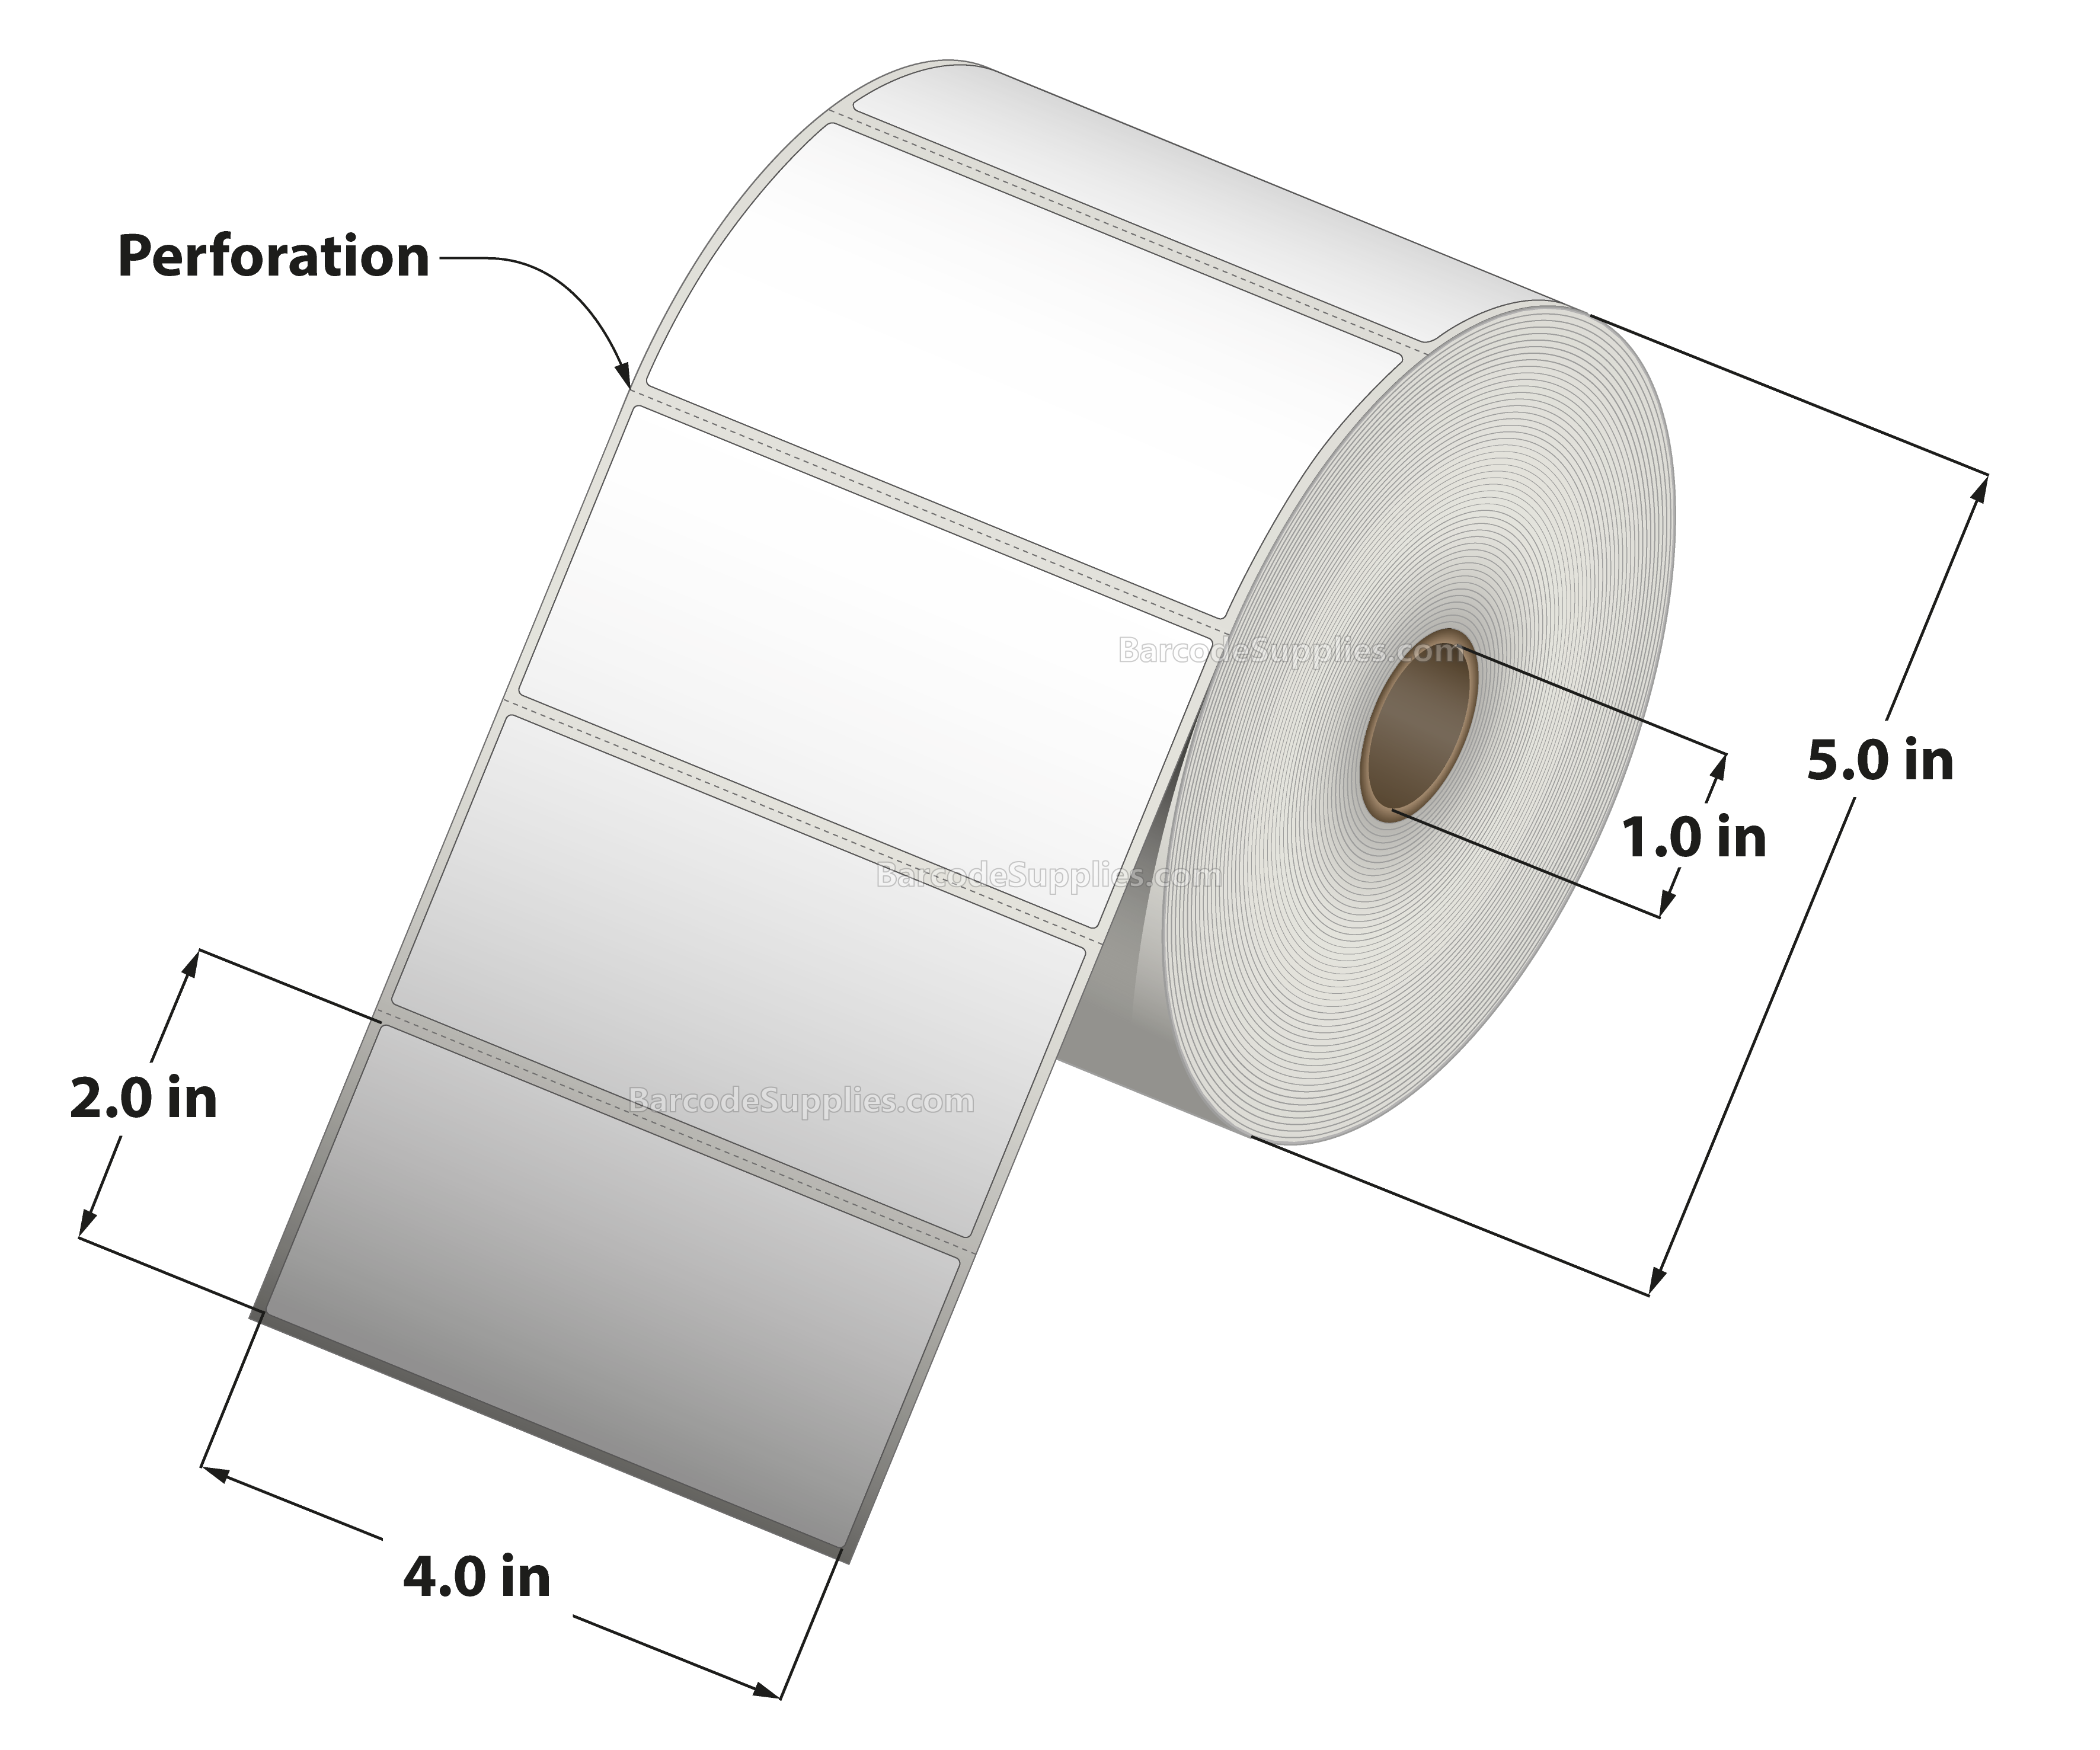 4 x 2 Direct Thermal White Labels With Acrylic Adhesive - Perforated - 1320 Labels Per Roll - Carton Of 12 Rolls - 15840 Labels Total - MPN: RD-4-2-1320-1 - BarcodeSource, Inc.